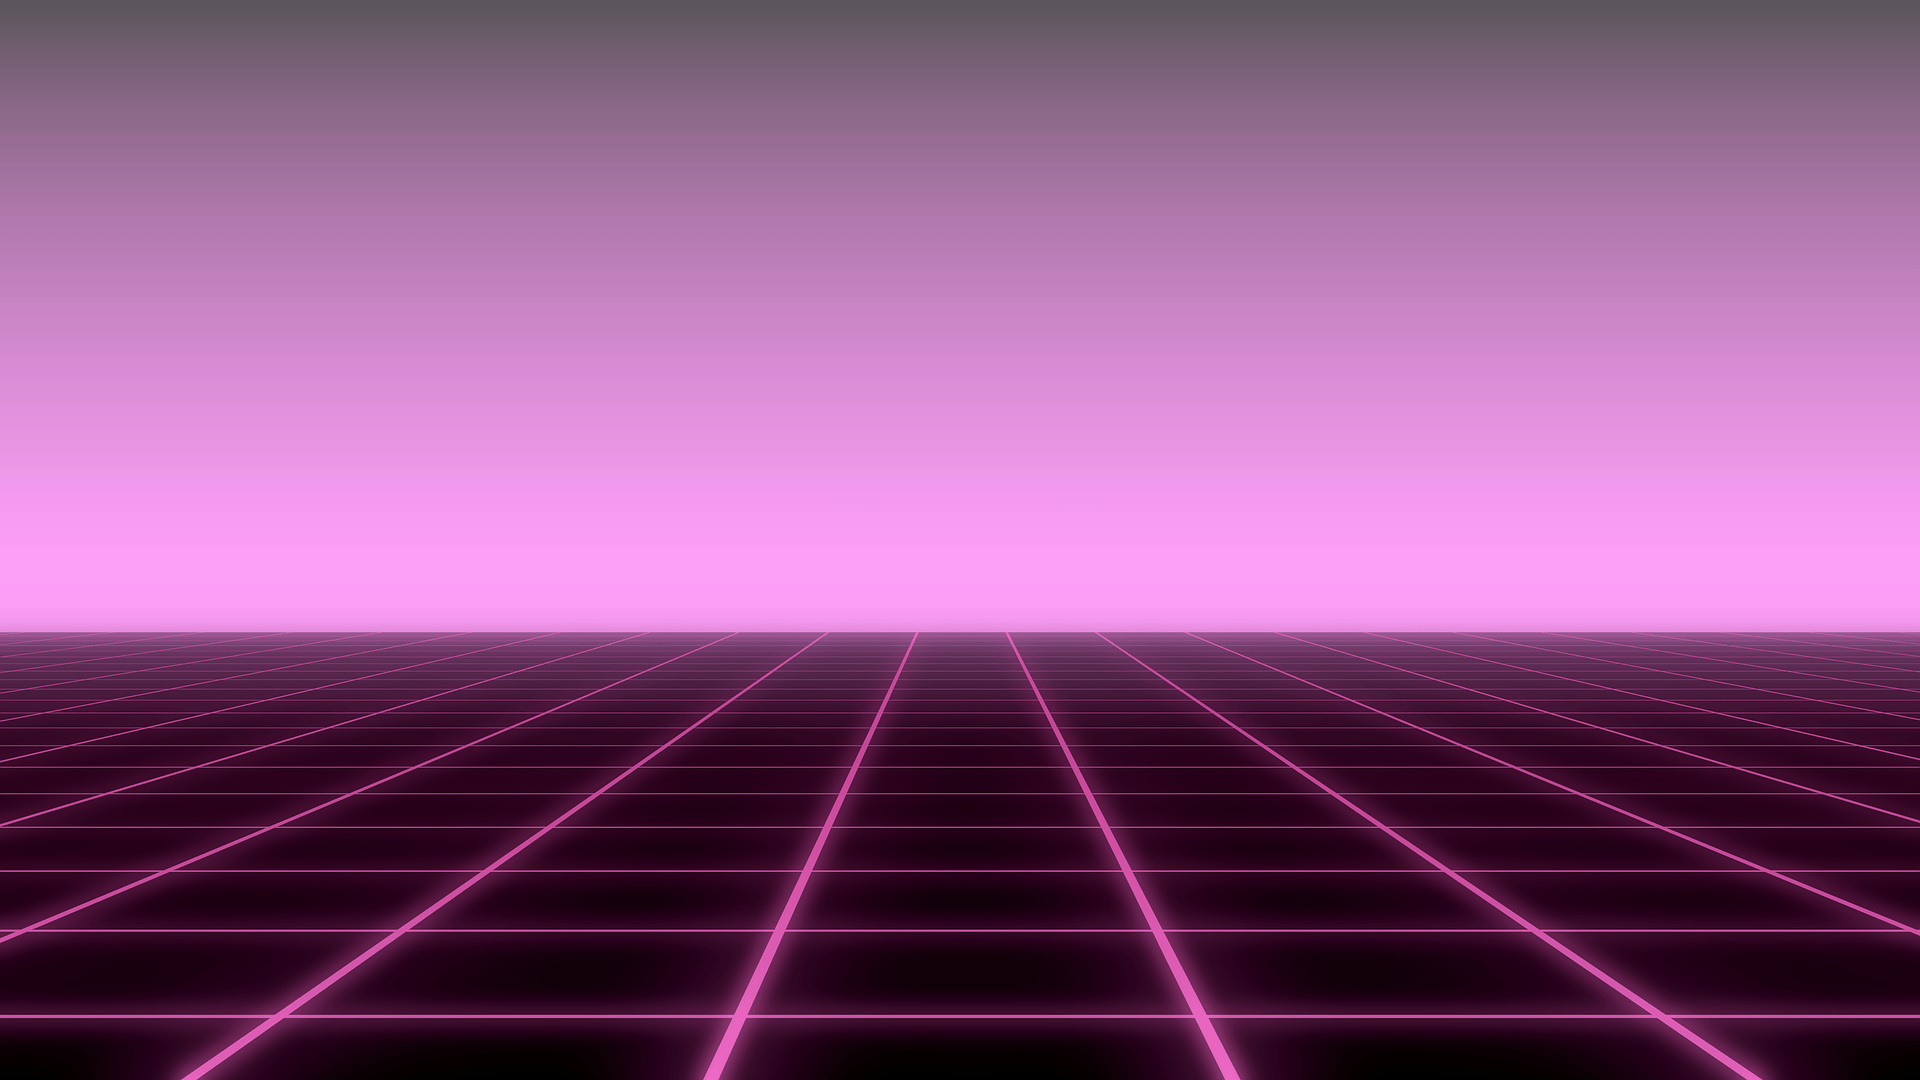 A purple neon grid on a black background - Neon pink